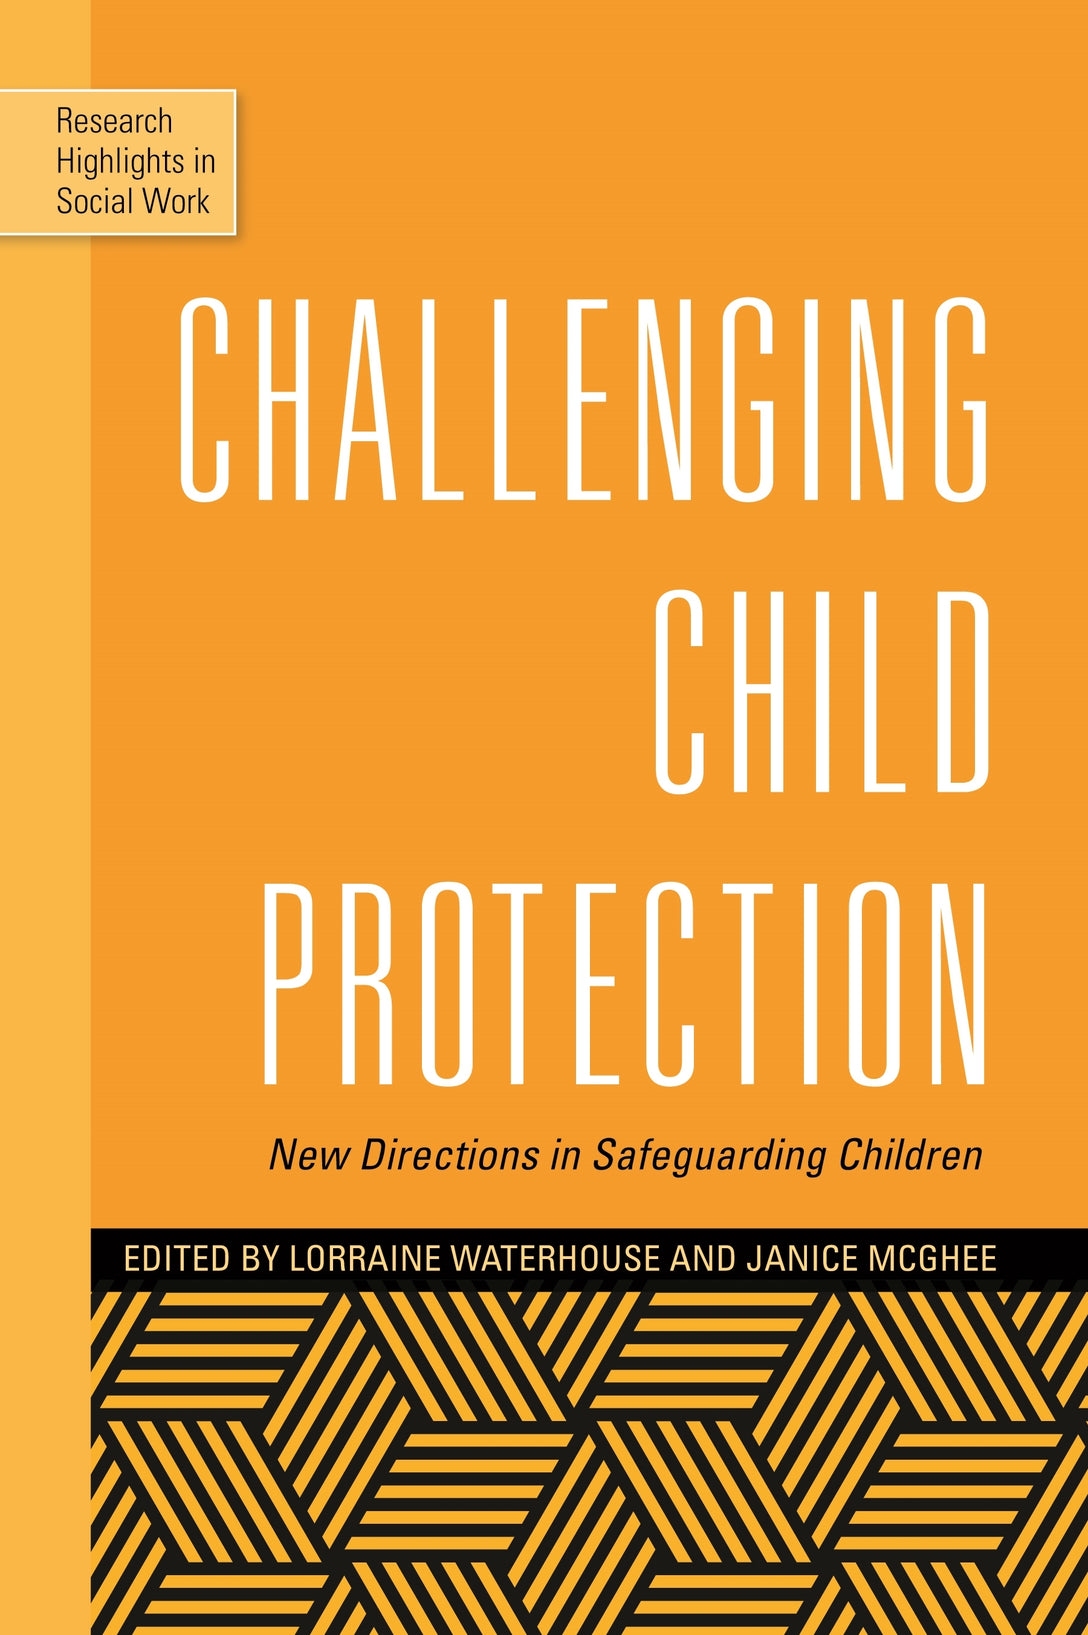 Challenging Child Protection by No Author Listed, Lorraine Waterhouse, Andrew Kendrick, Janice McGhee